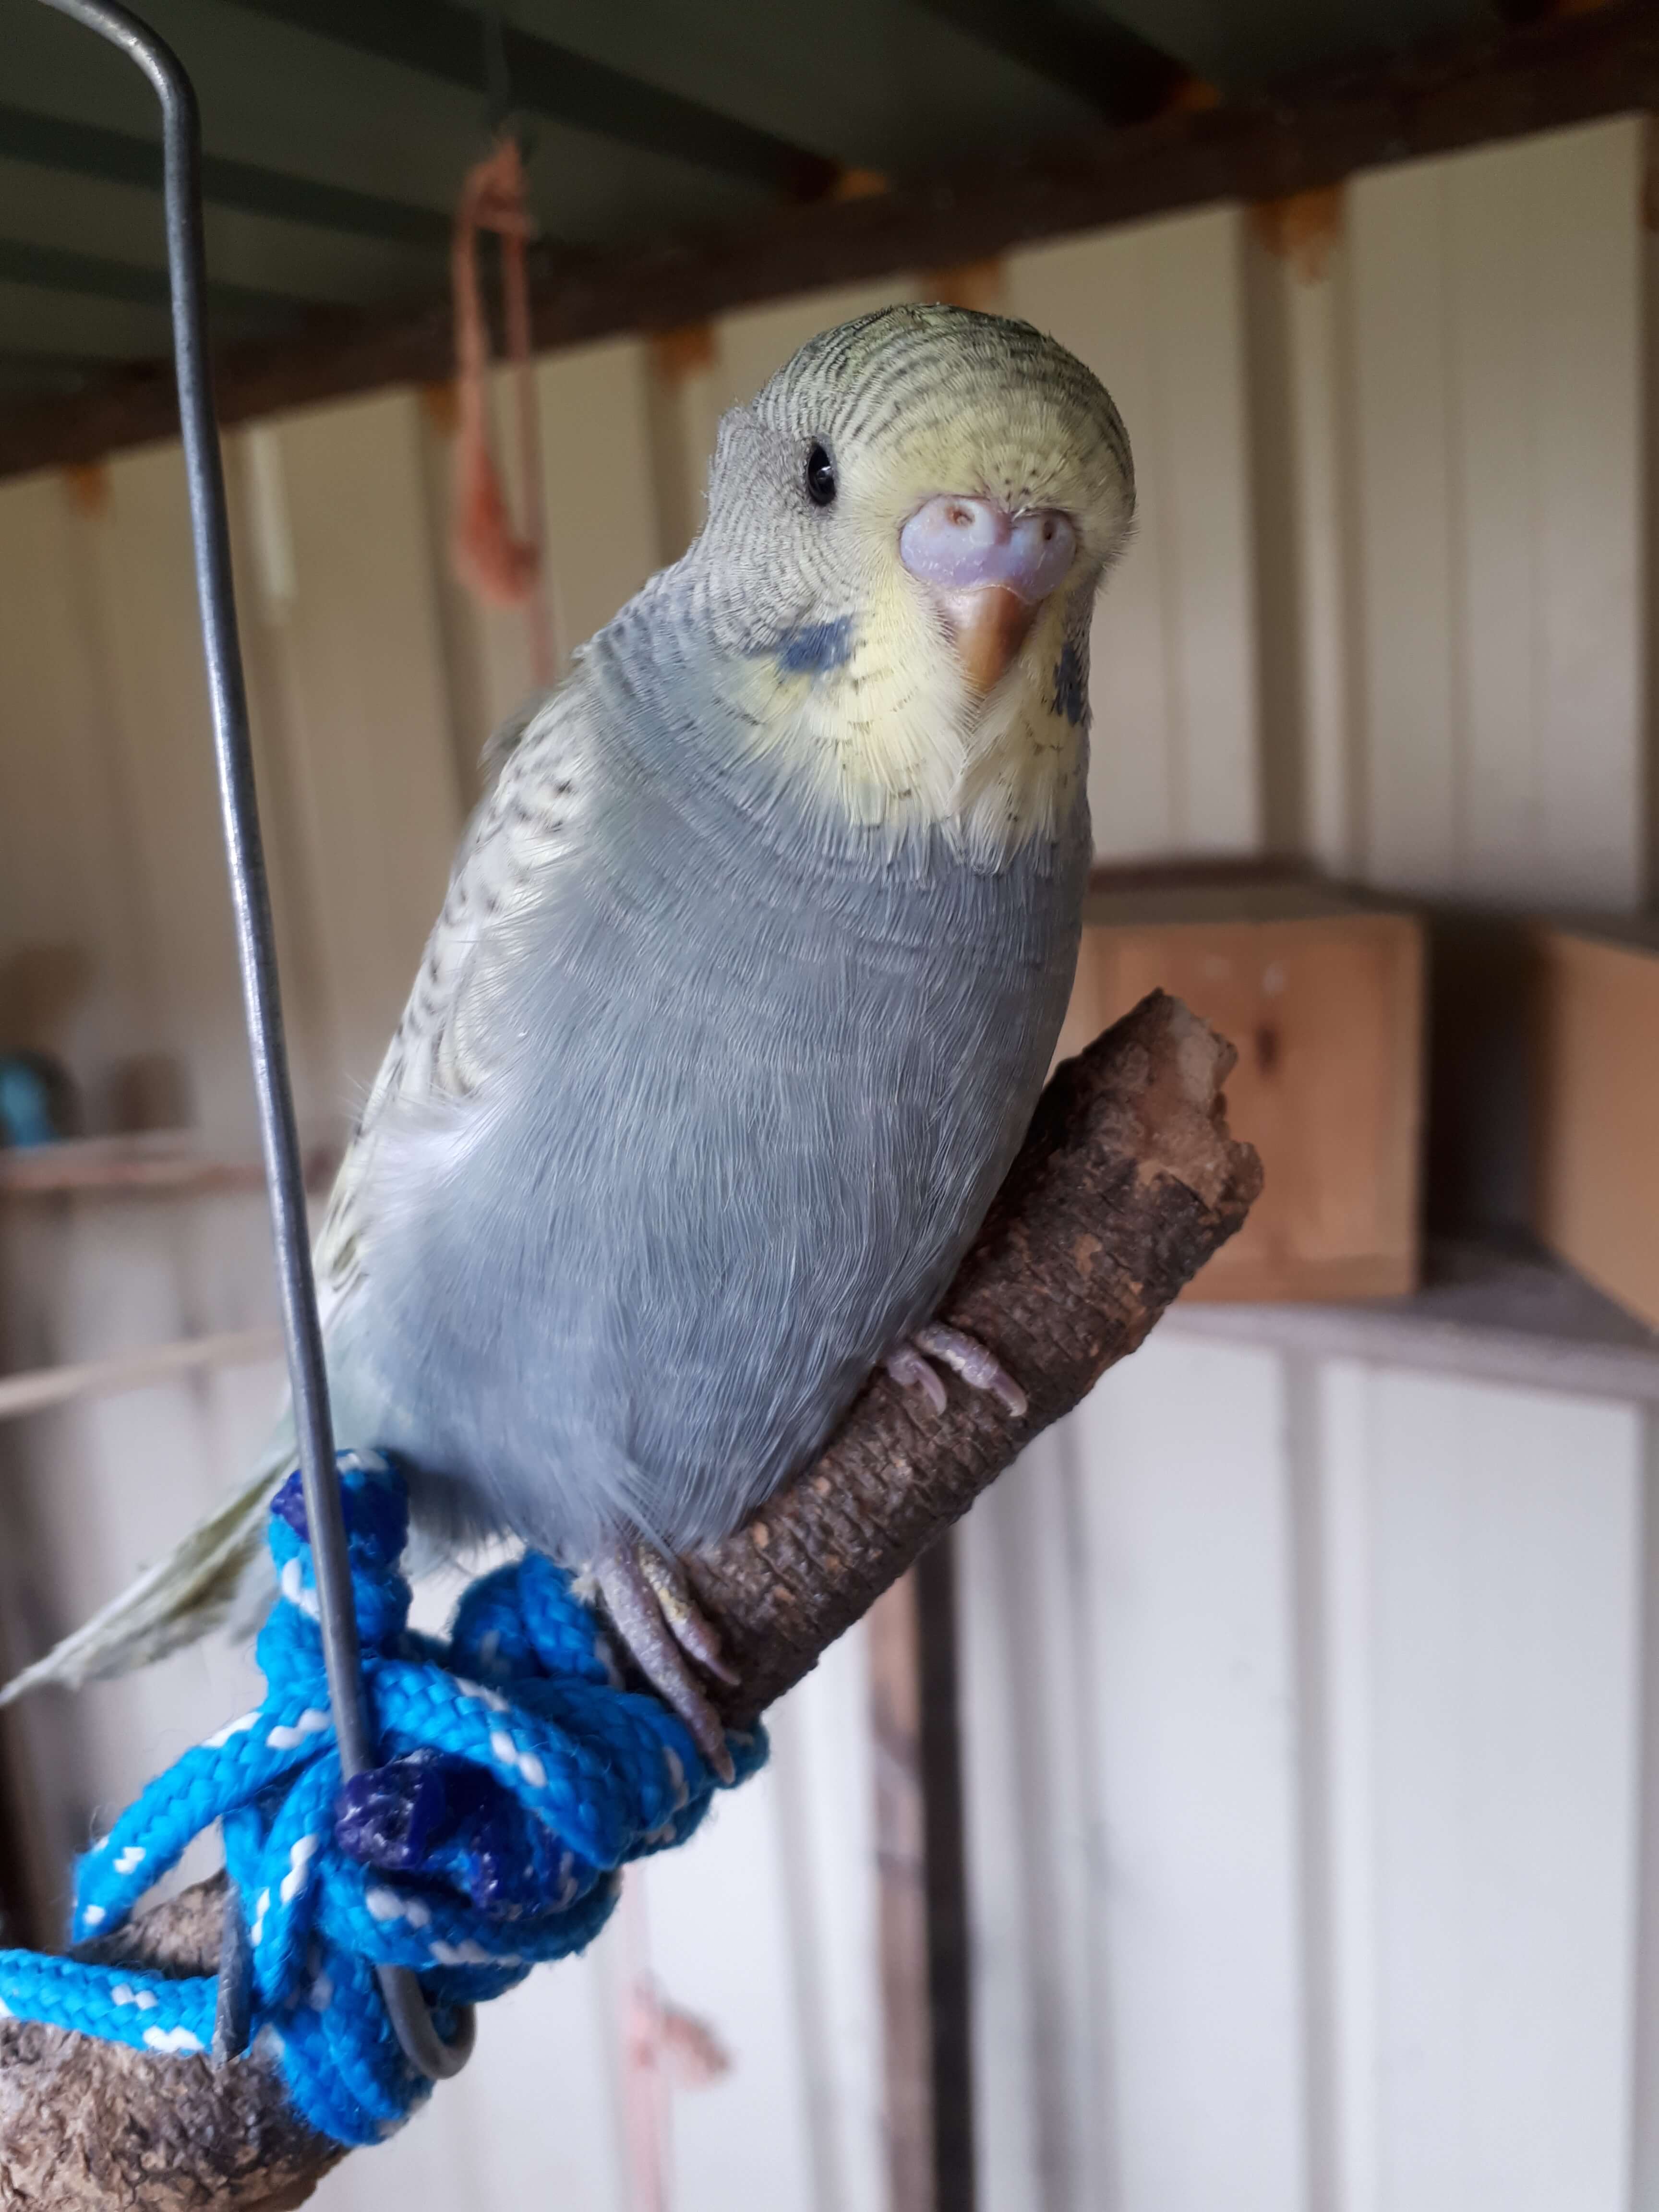 Cute Baby Budgies for sale in Geelong. Budgies are the perfect pet!